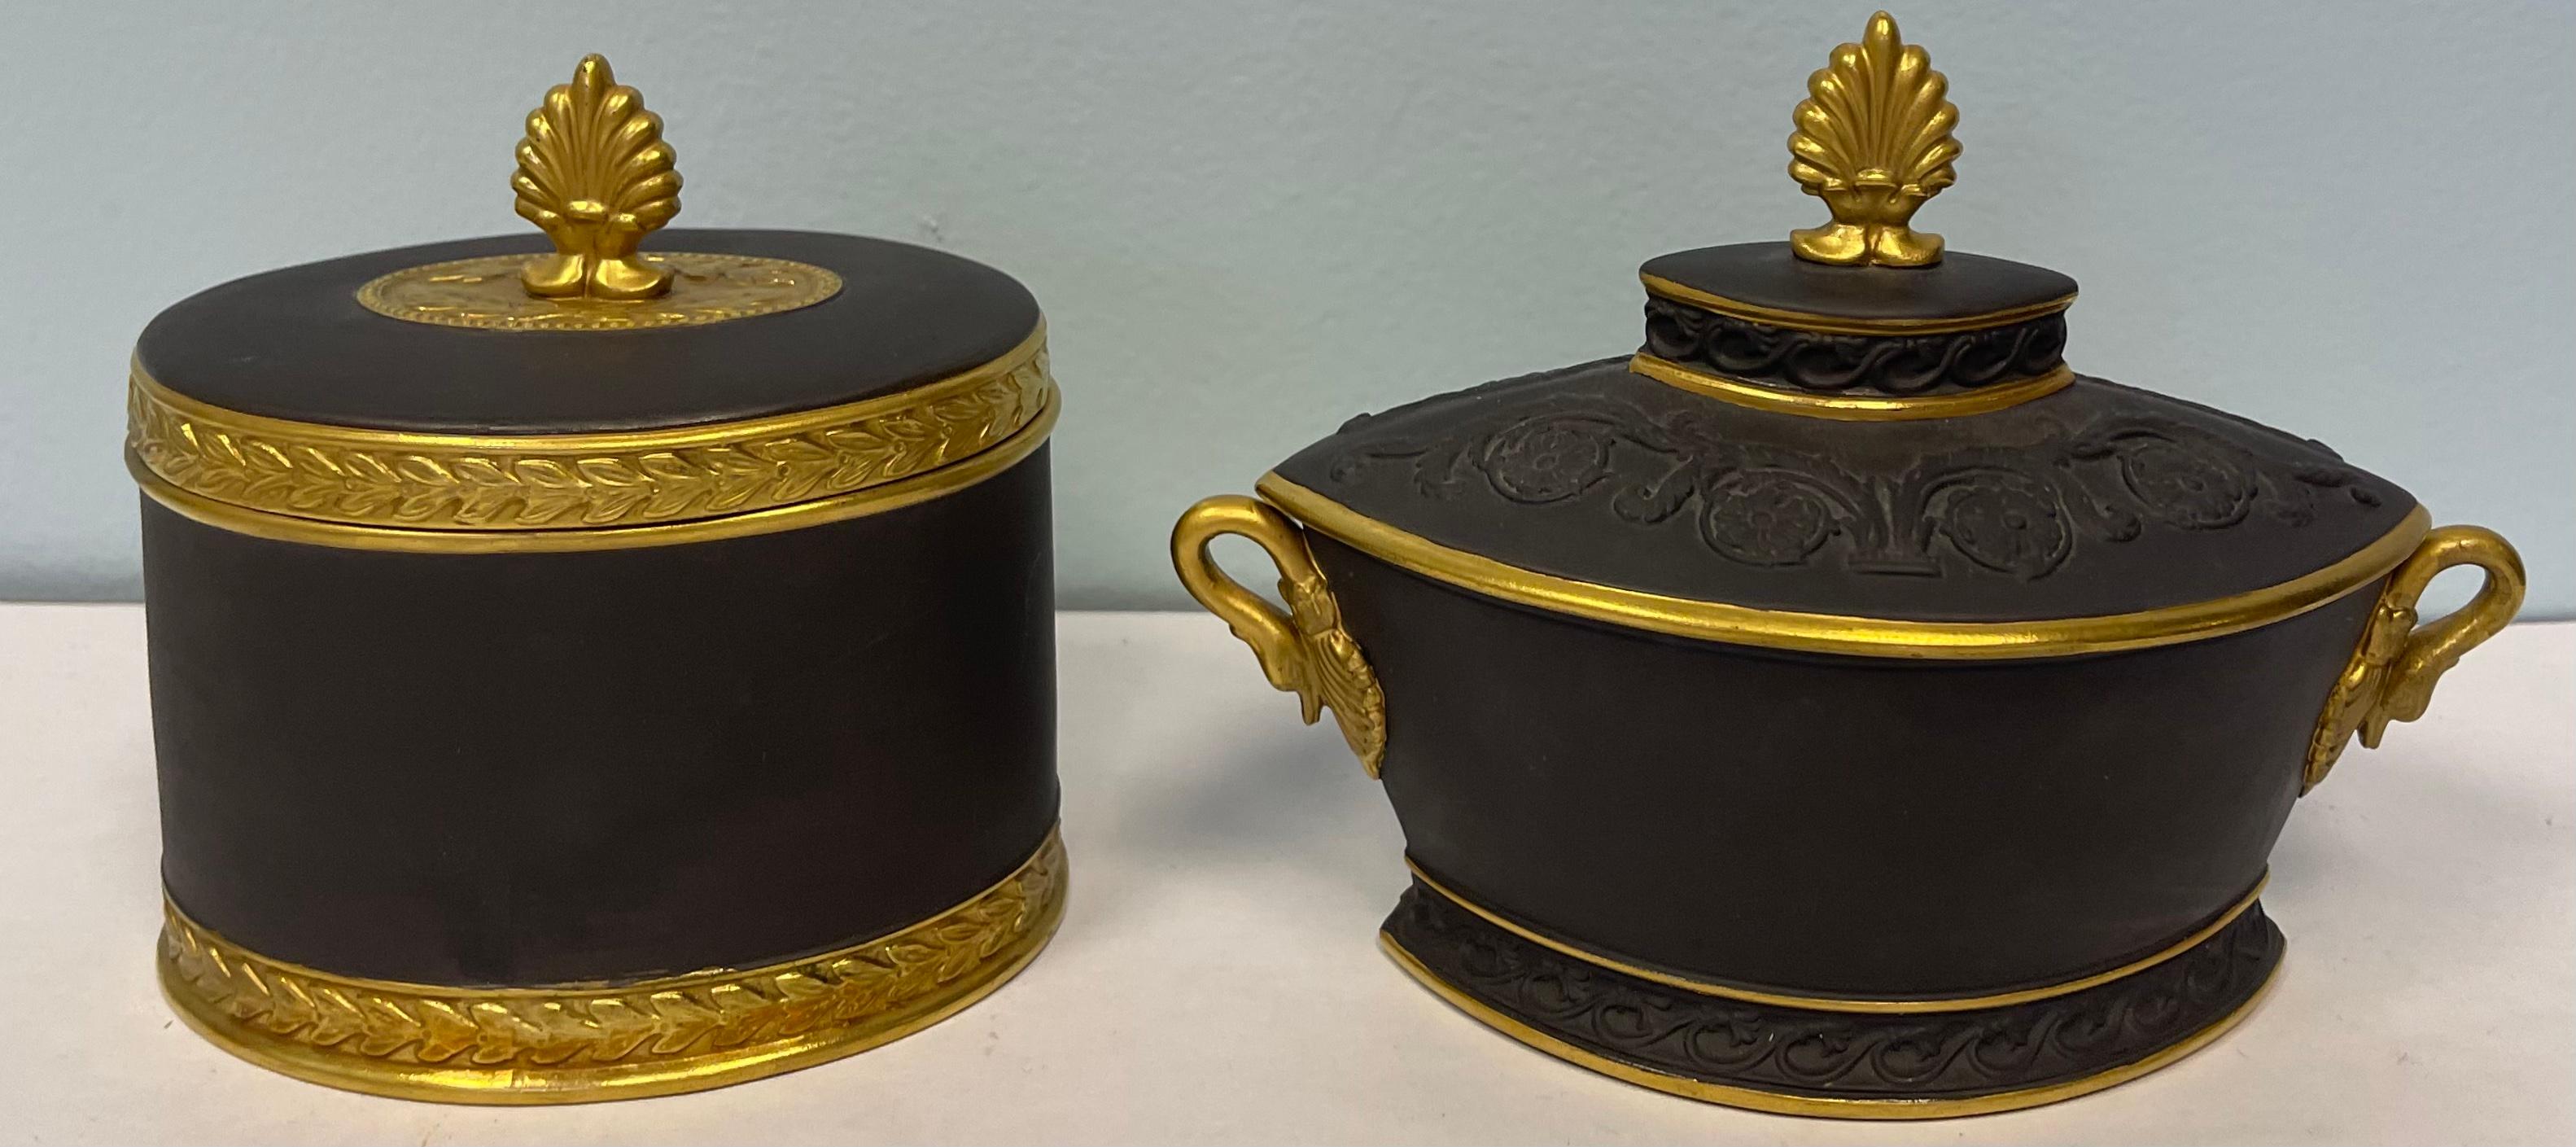 Gold Neoclassical Style Italian Black Basalt Jars by Mottahedeh, Set of 2